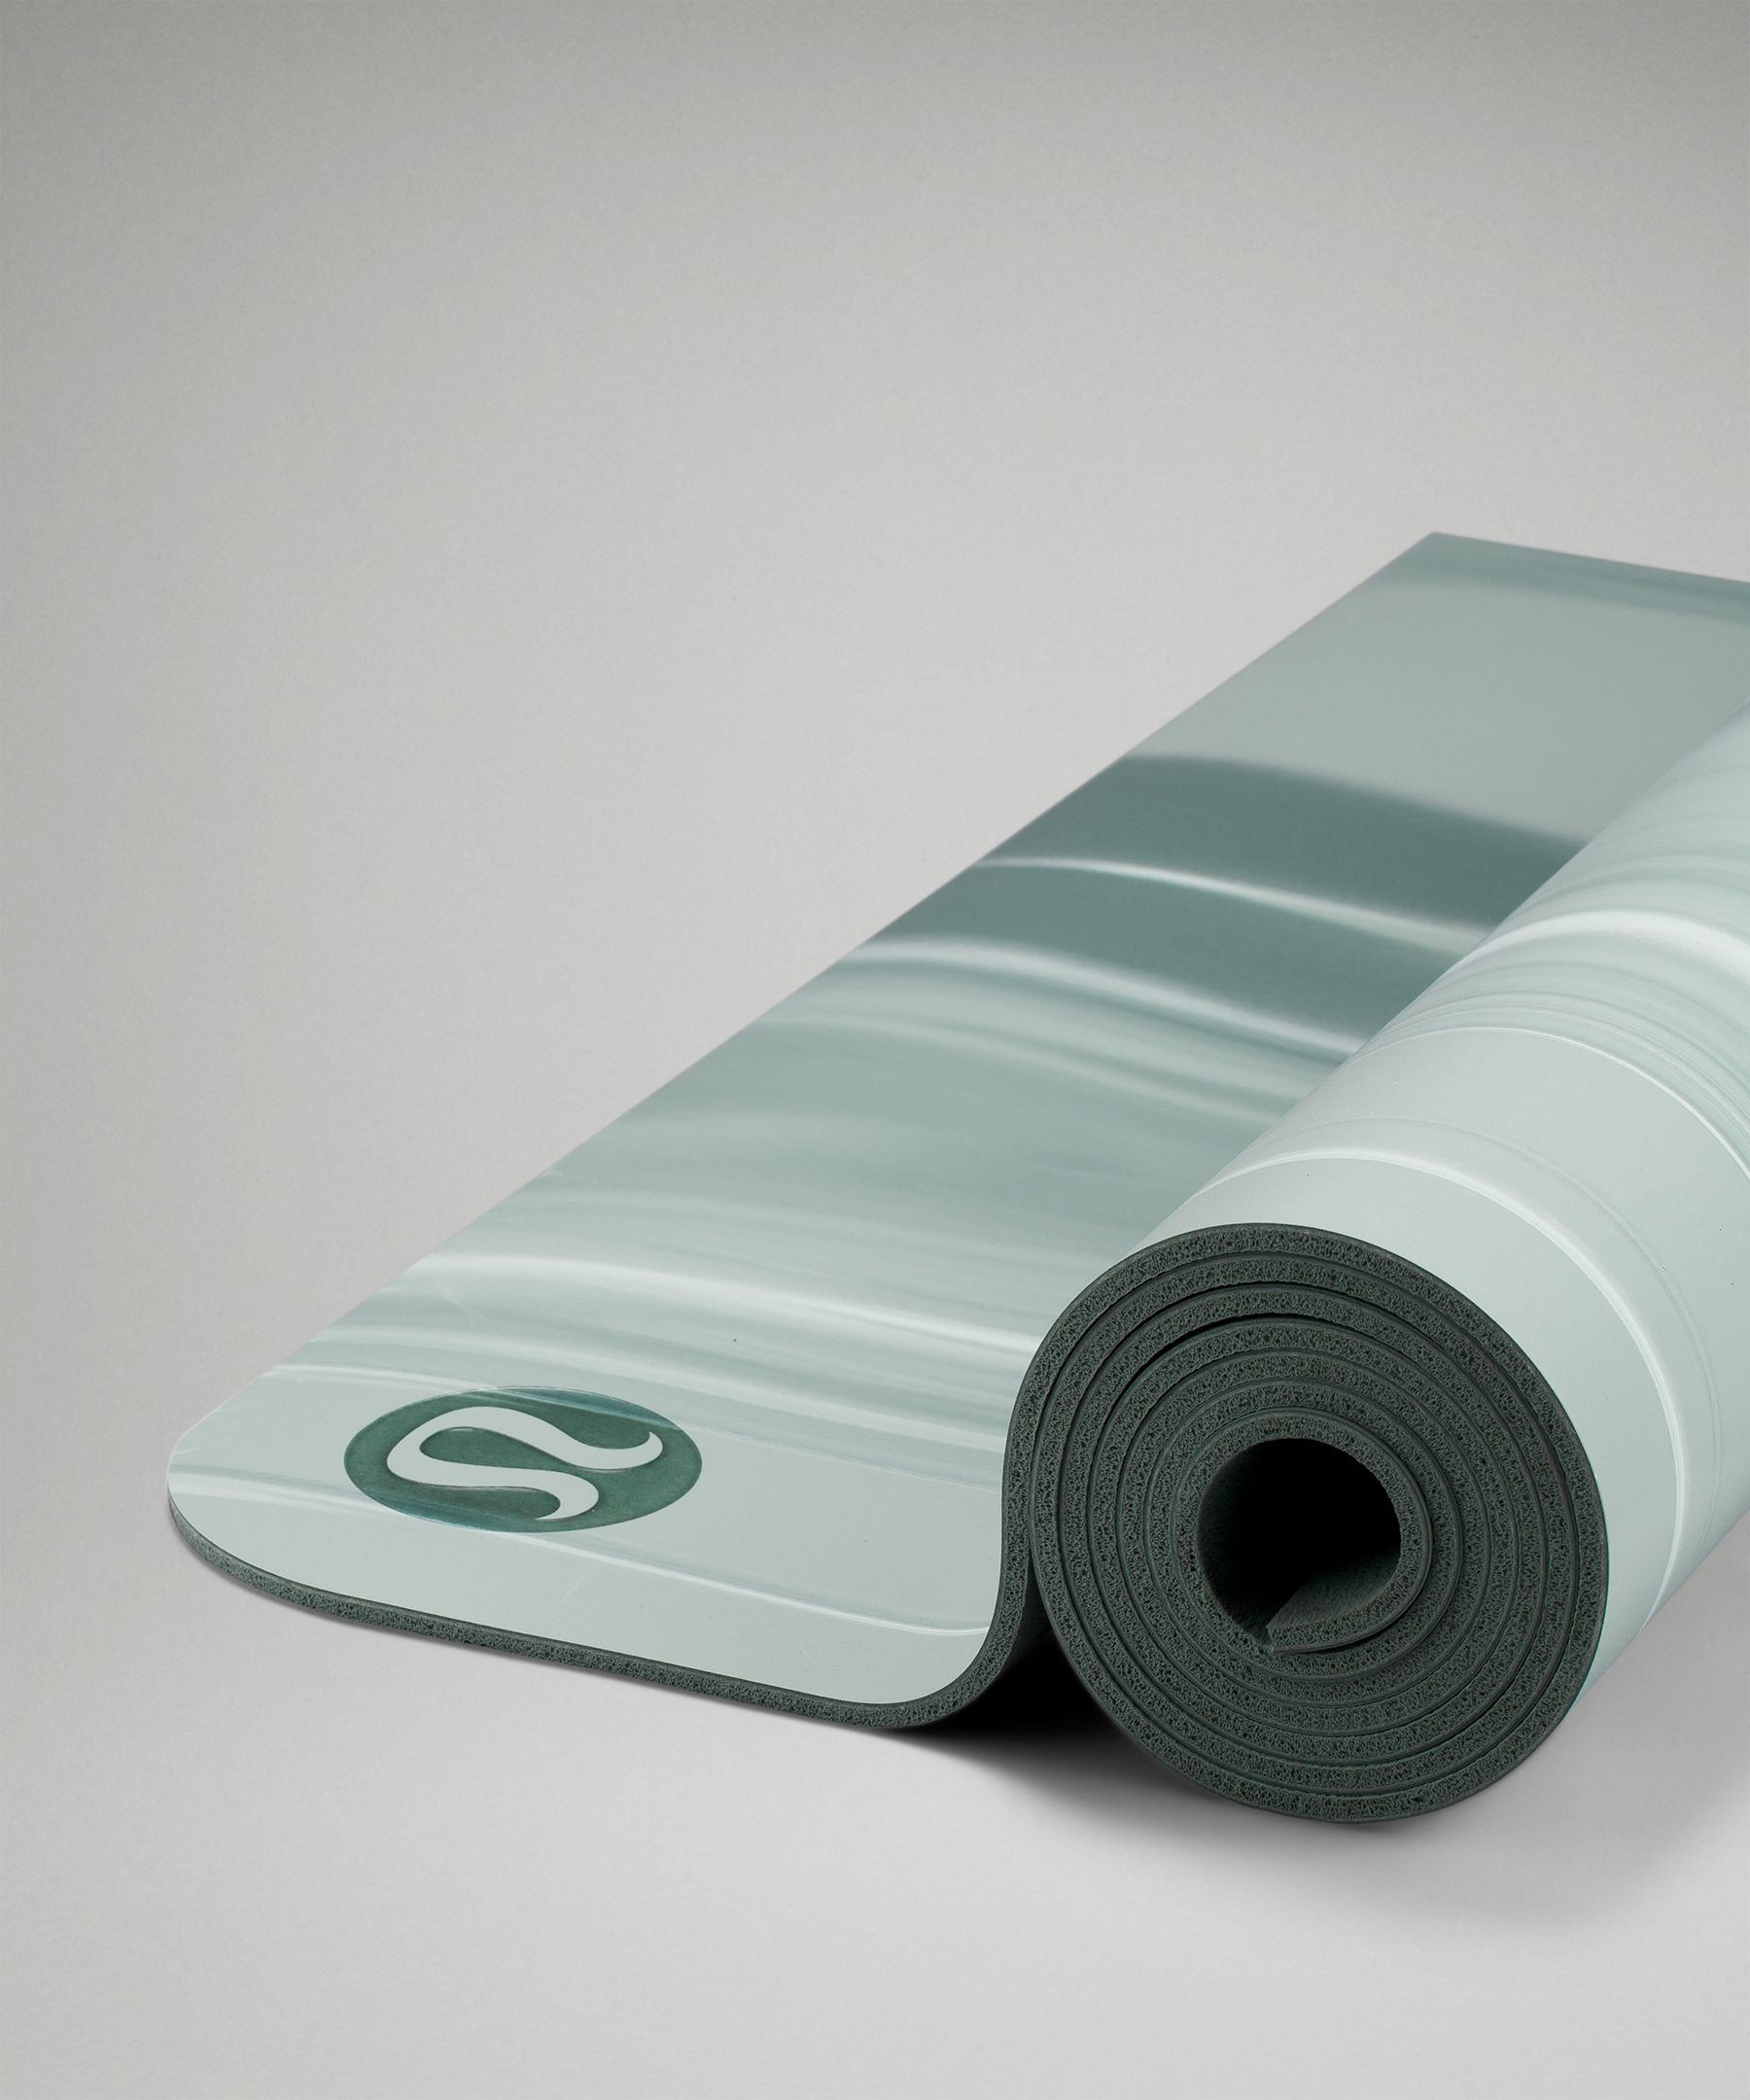 Yoga by Janice - Want to win a lululemon 5mm reversible yoga mat